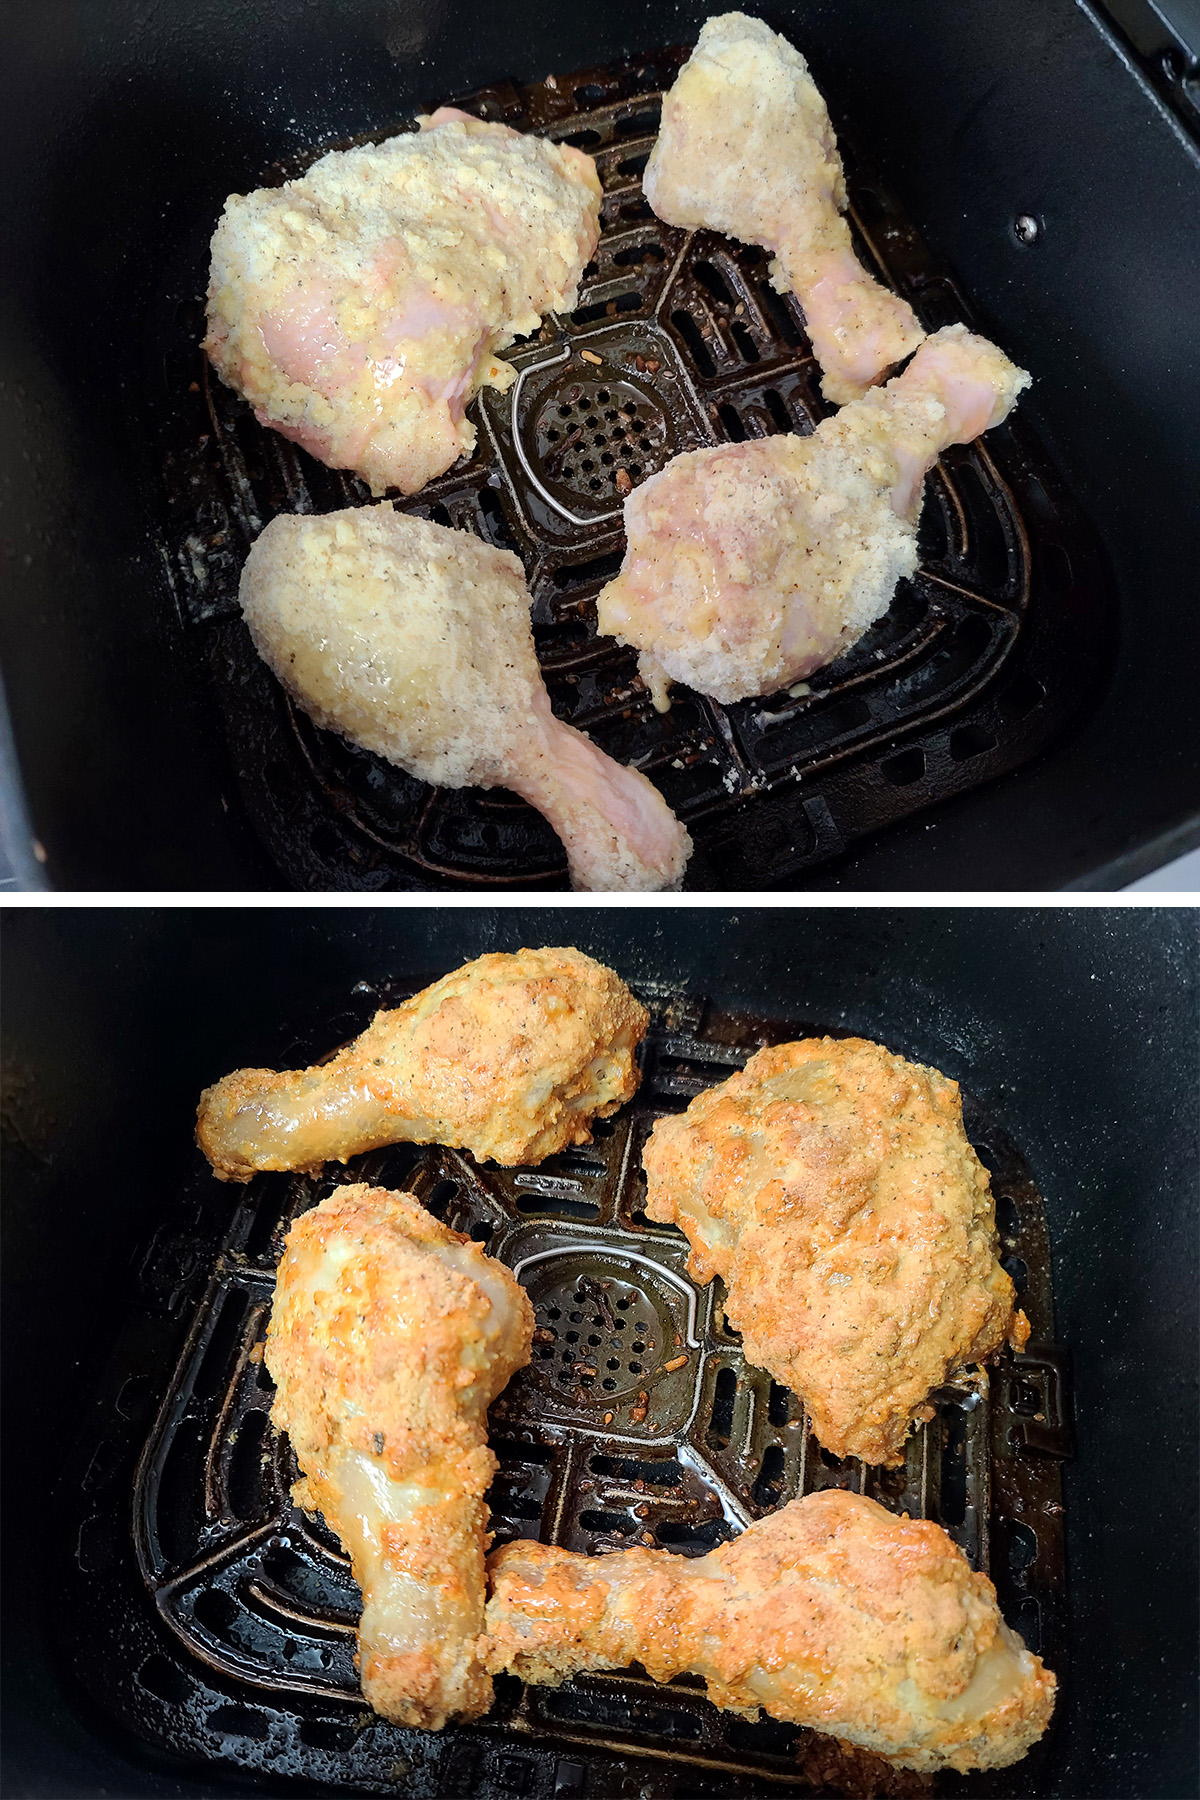 A two part image showing keto fried chicken being cooked in an air fryer.